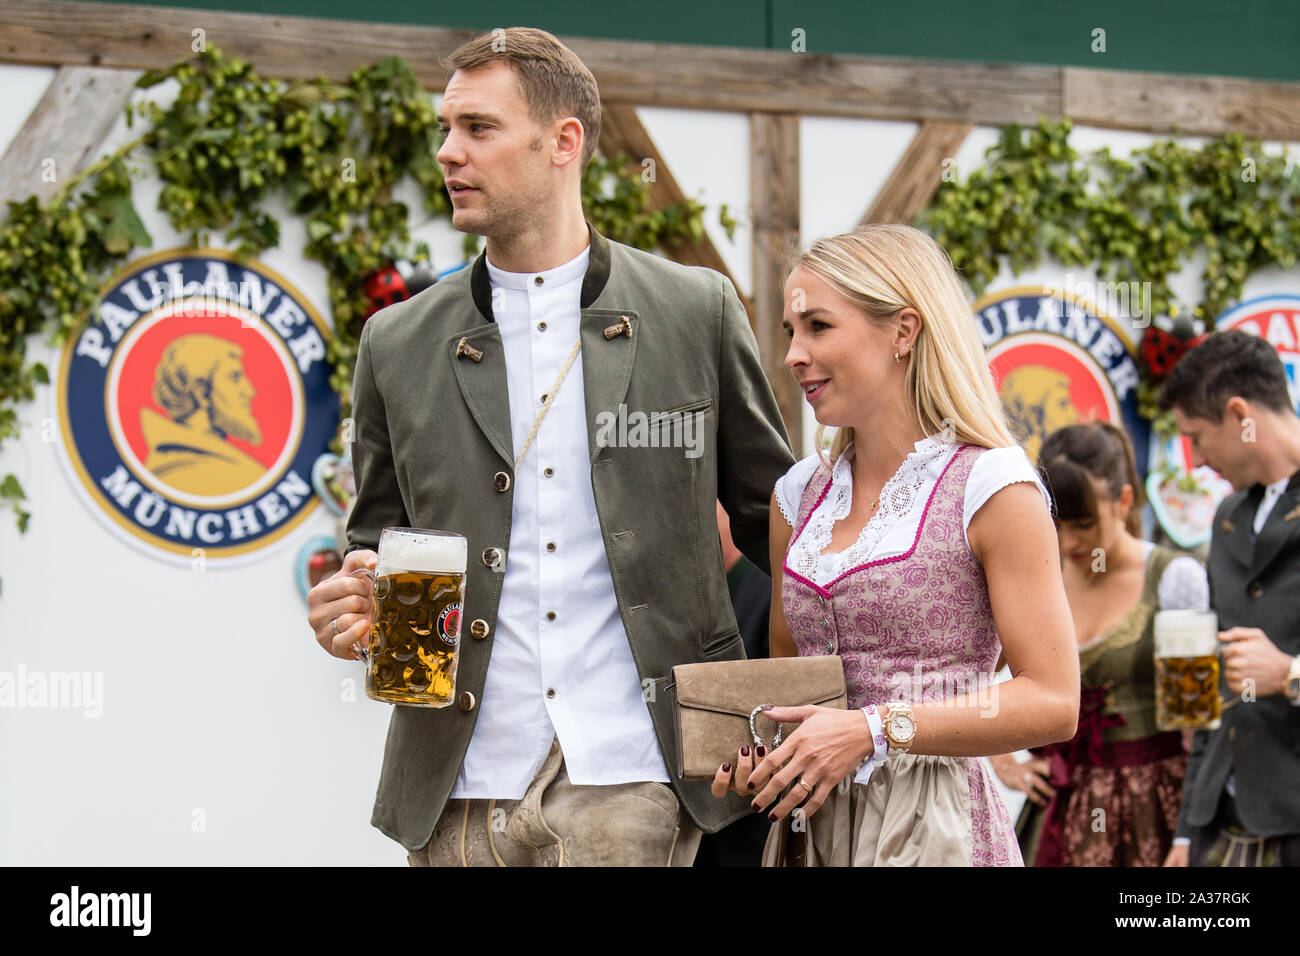 Munich, Germany. 06th Oct, 2019. Goalkeeper Manuel Neuer and his wife Nina Weiss come to the beetle tent at the Oktoberfest on the Theresienwiese. Players, coaches and managers of the Bundesliga soccer team FC Bayern traditionally visit the Käfer tent together once during the Oktoberfest. Credit: Matthias Balk/dpa/Alamy Live News Stock Photo